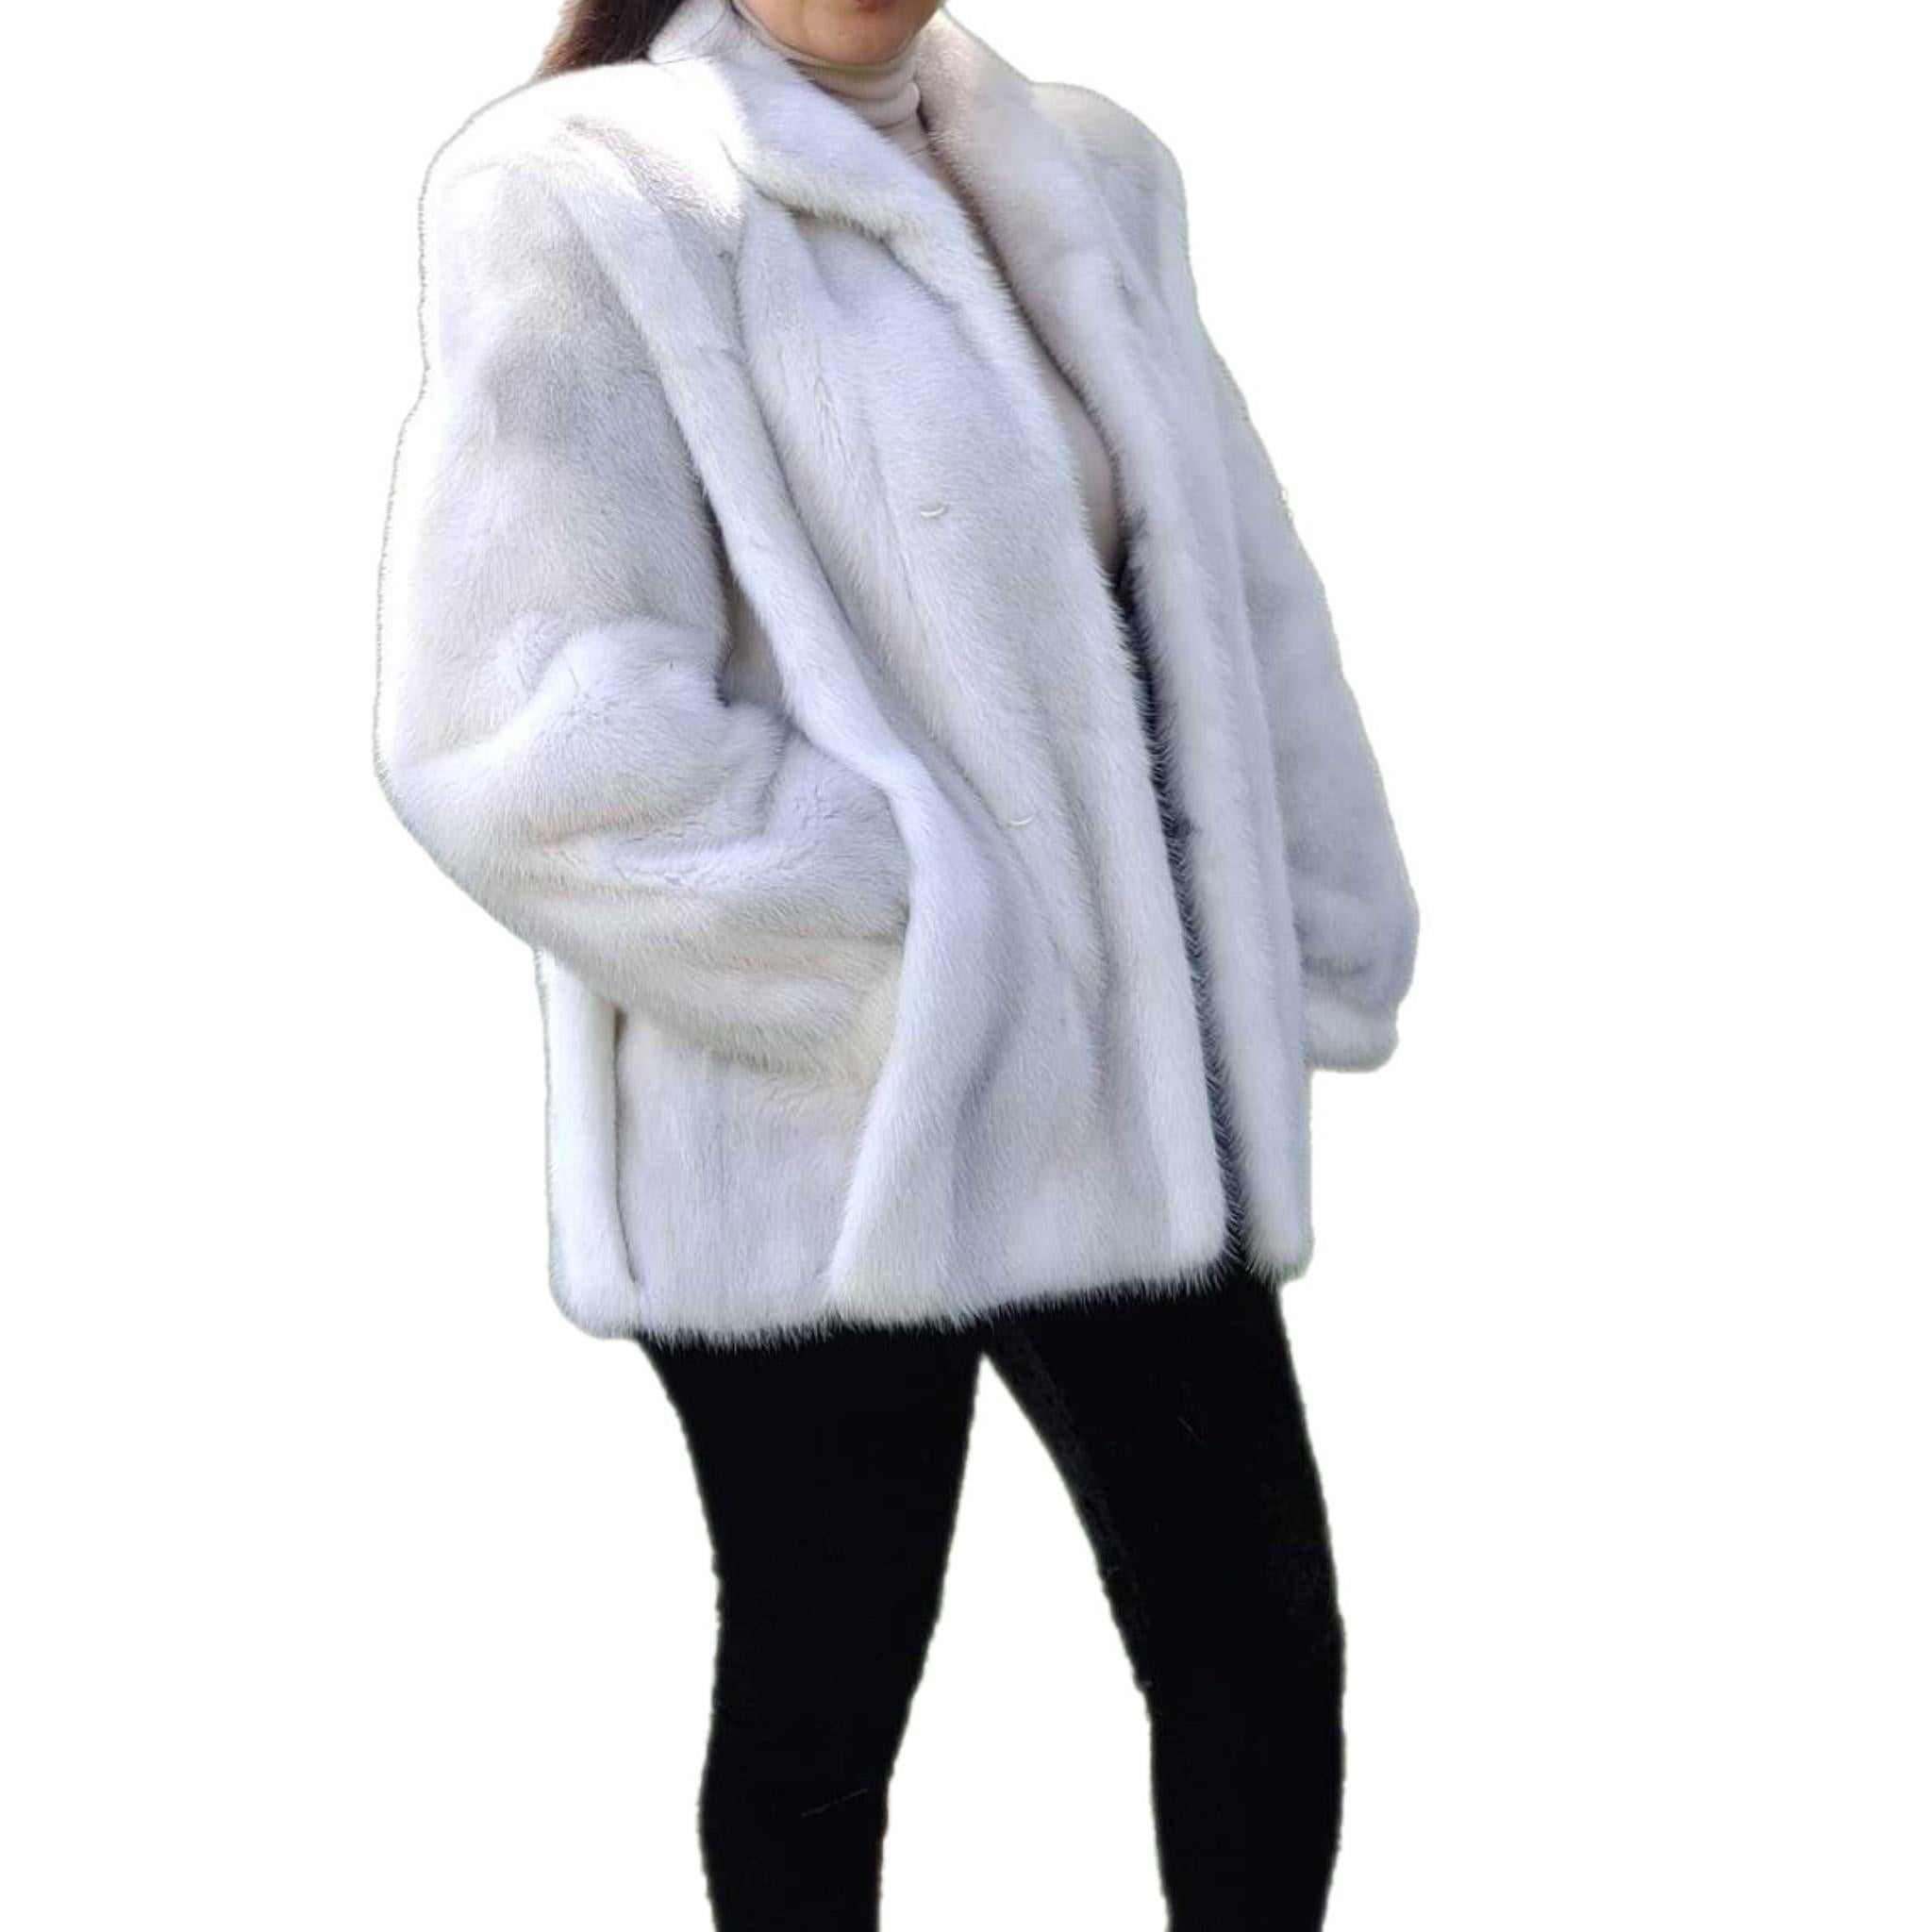 ~ Unused Tourmaline Mink Fur Coat (Size 8 - M) 

Made in Canada

MEASUREMENTS :
Size: 8 (M)

-LENGTH: 32''

-BACK ACROSS: 22''

-SLEEVES neck to shoulder and Shoulder to wrist:29-24''

-INSIDE ARMHOLE TO ARMHOLE: 22''

-BUST: 44

-SWEEP: 57''

